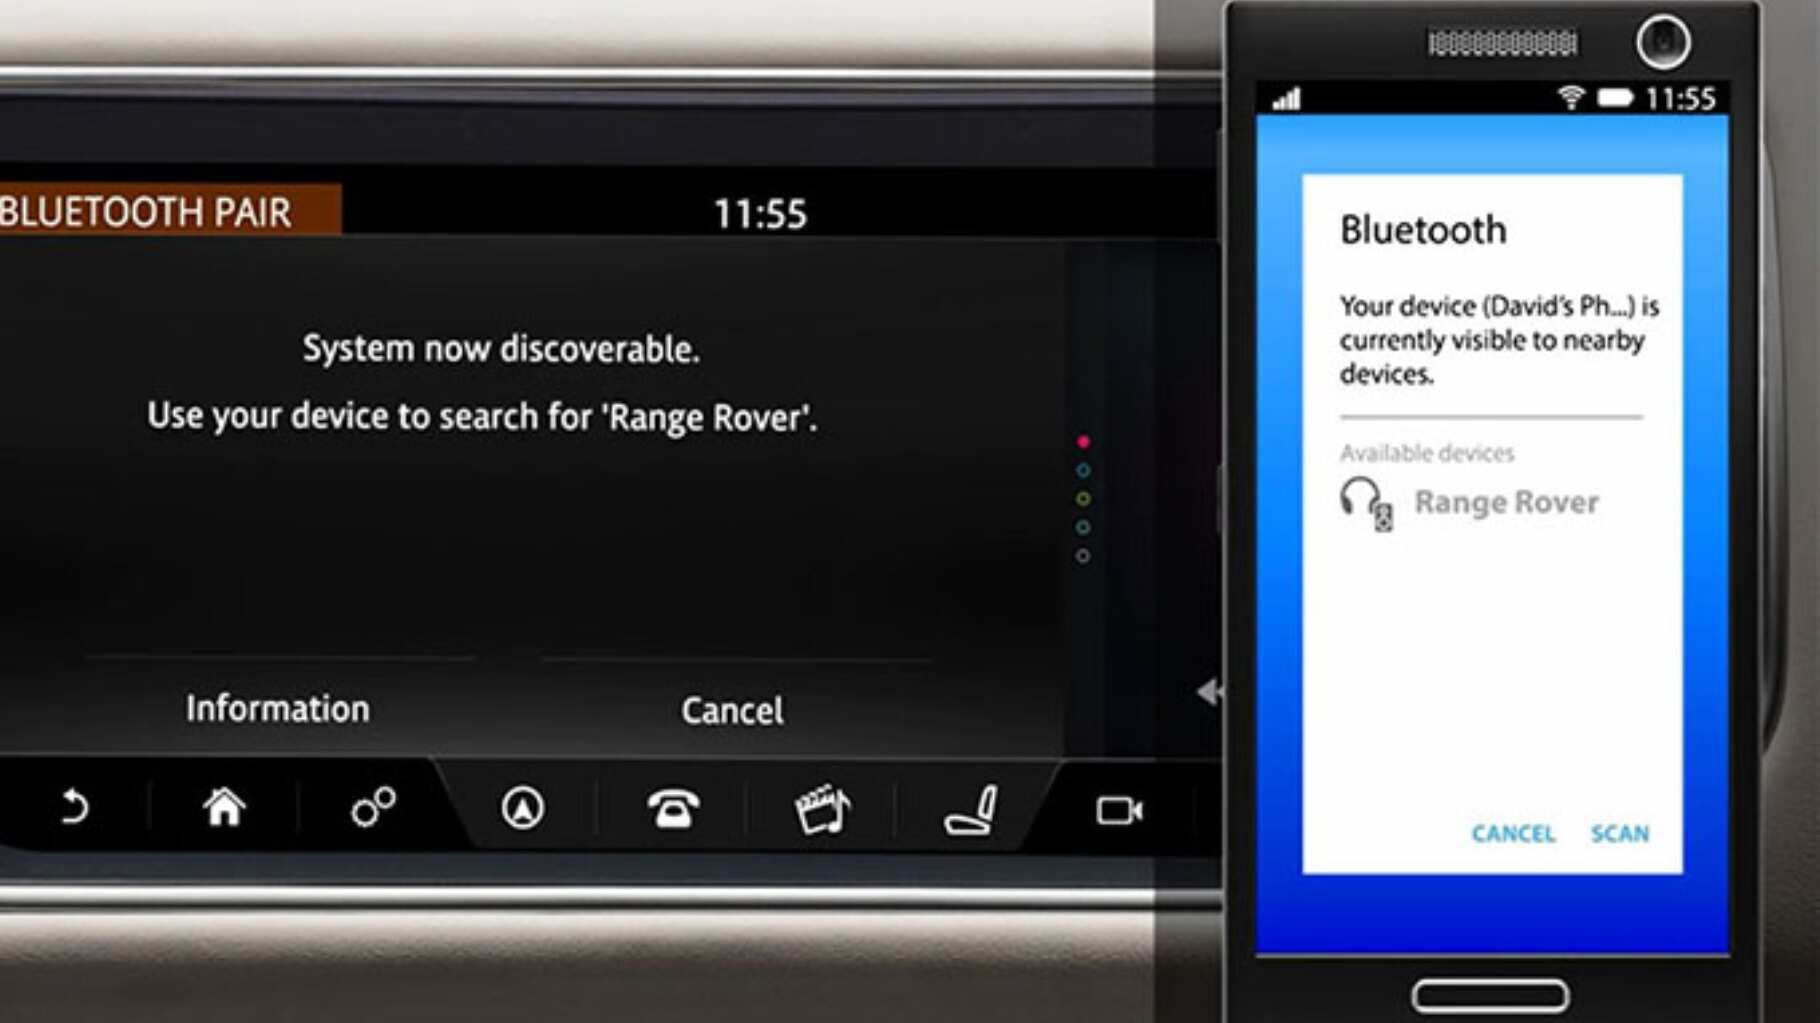 INCONTROL TOUCH PRO: BLUETOOTH PHONE PAIRING